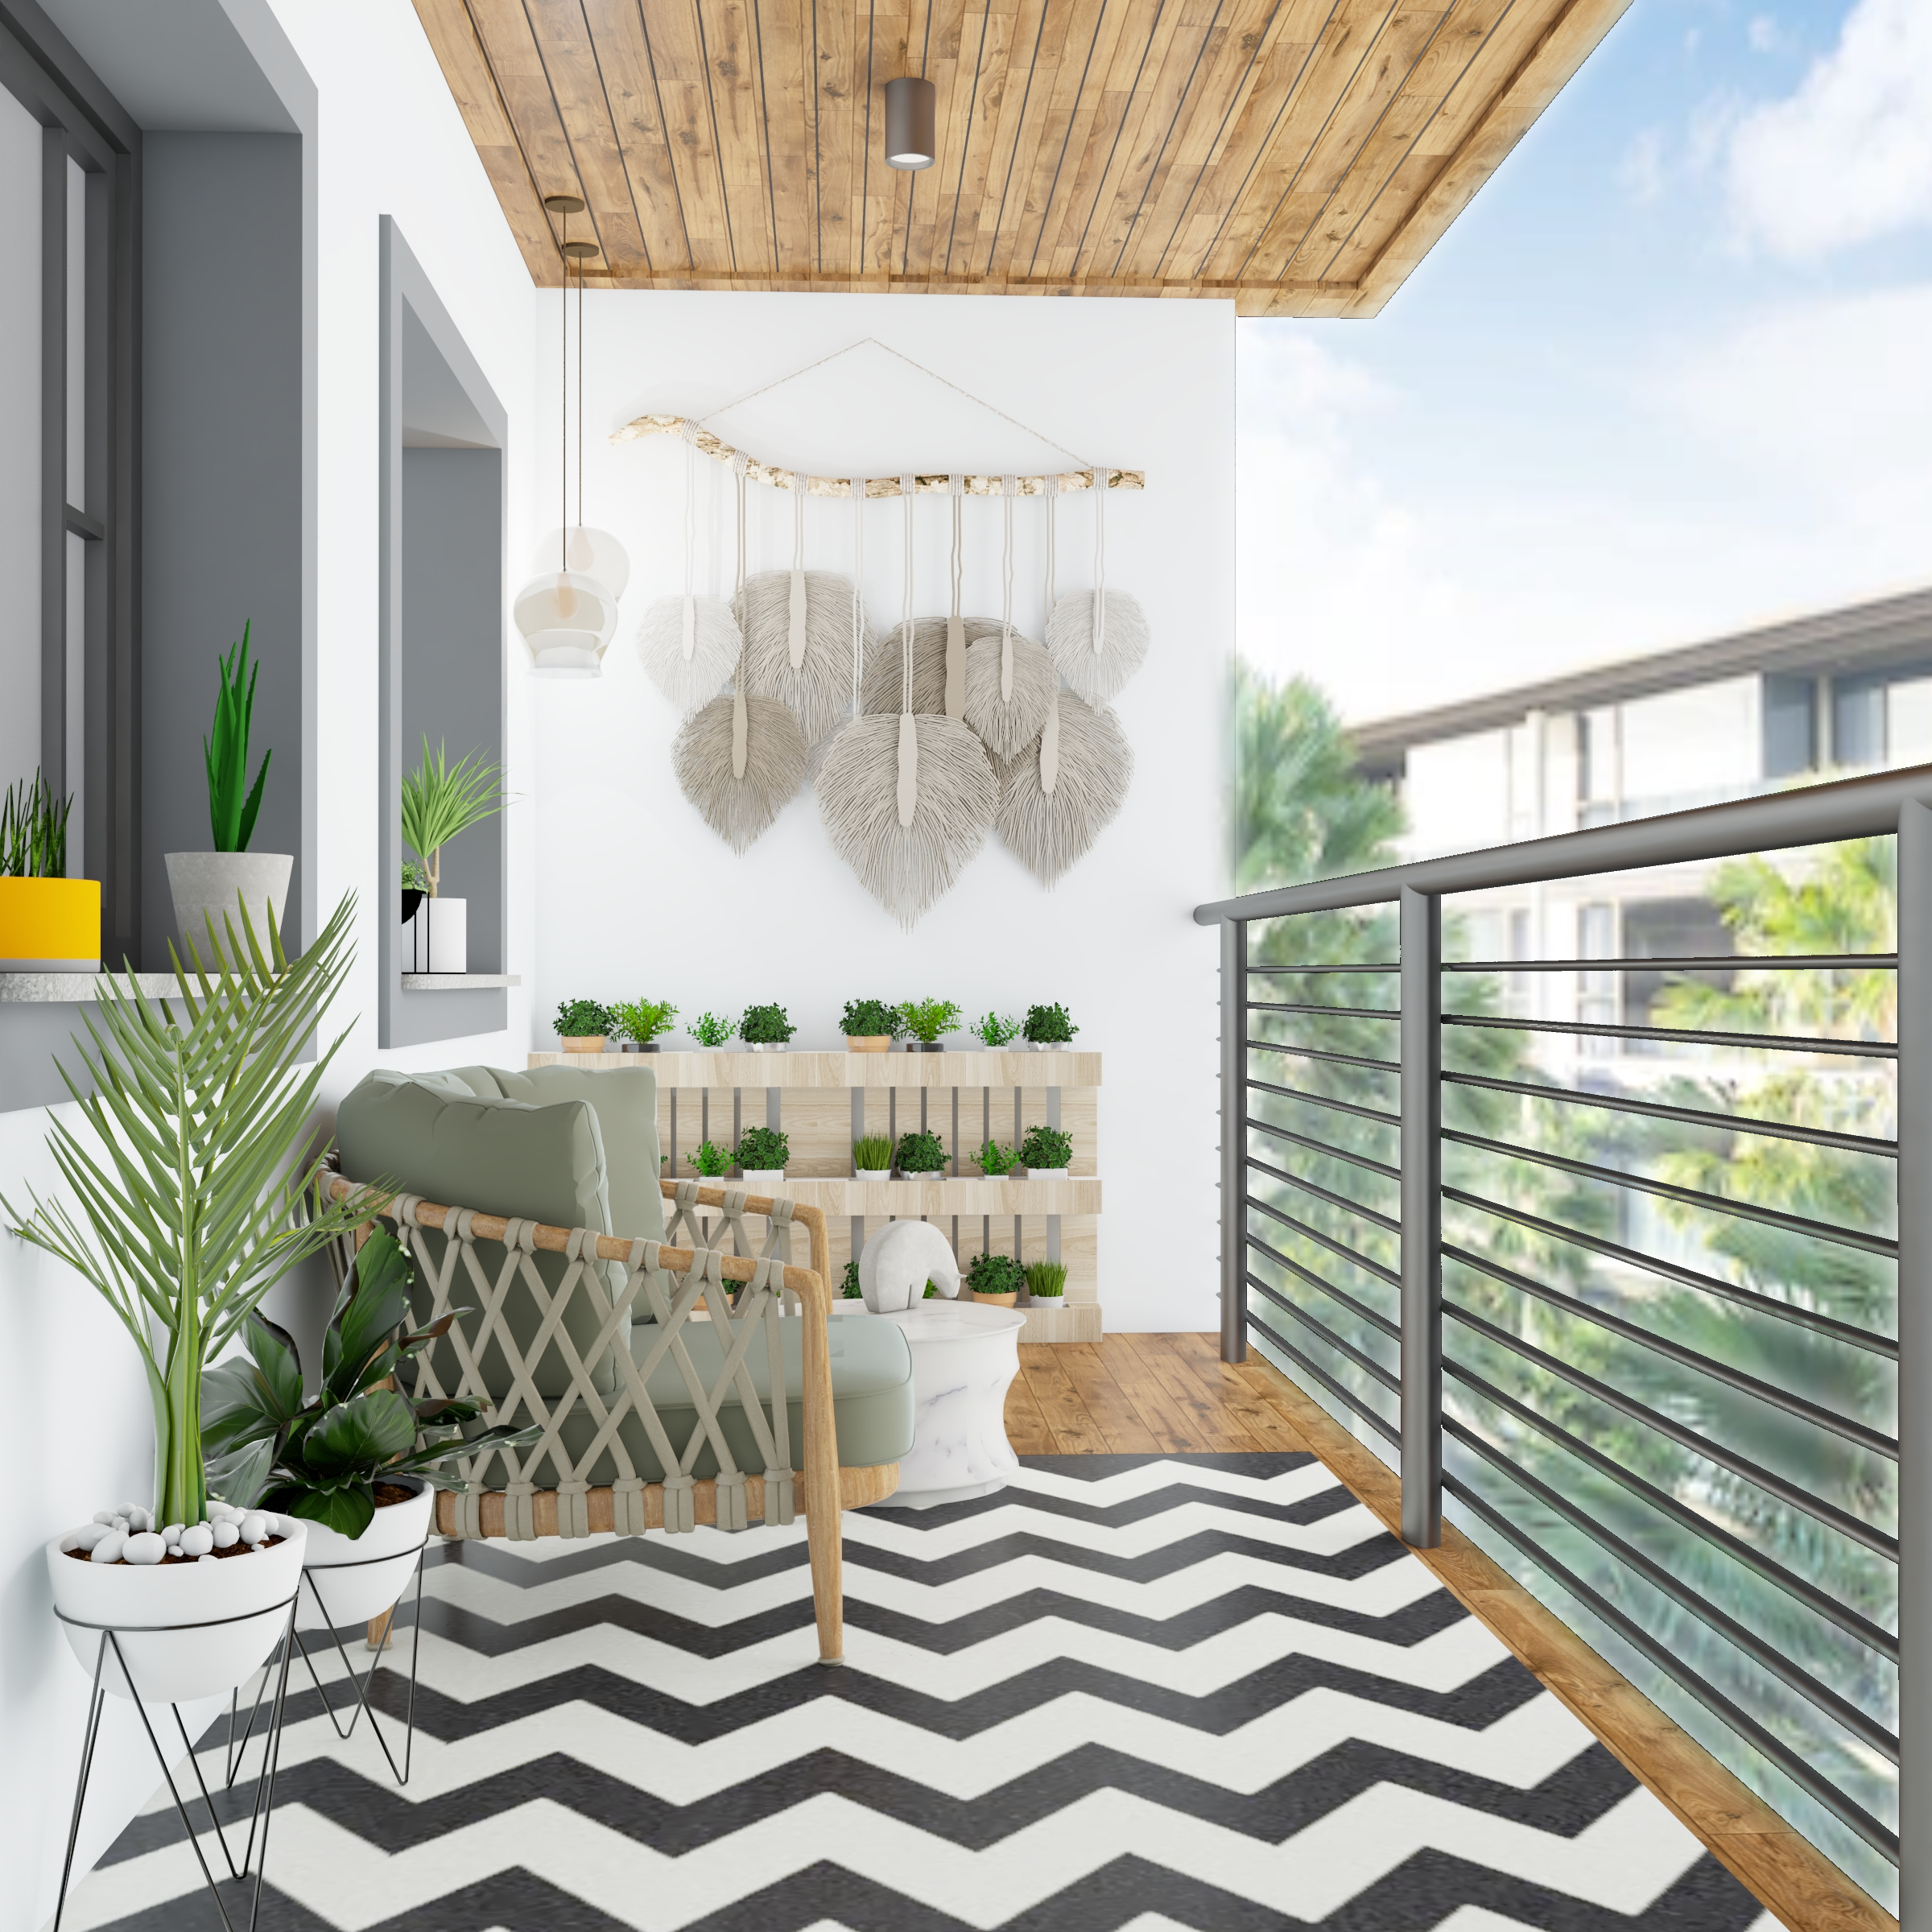 Wooden Flooring and Ceiling Compact Balcony Design with Macrame Art